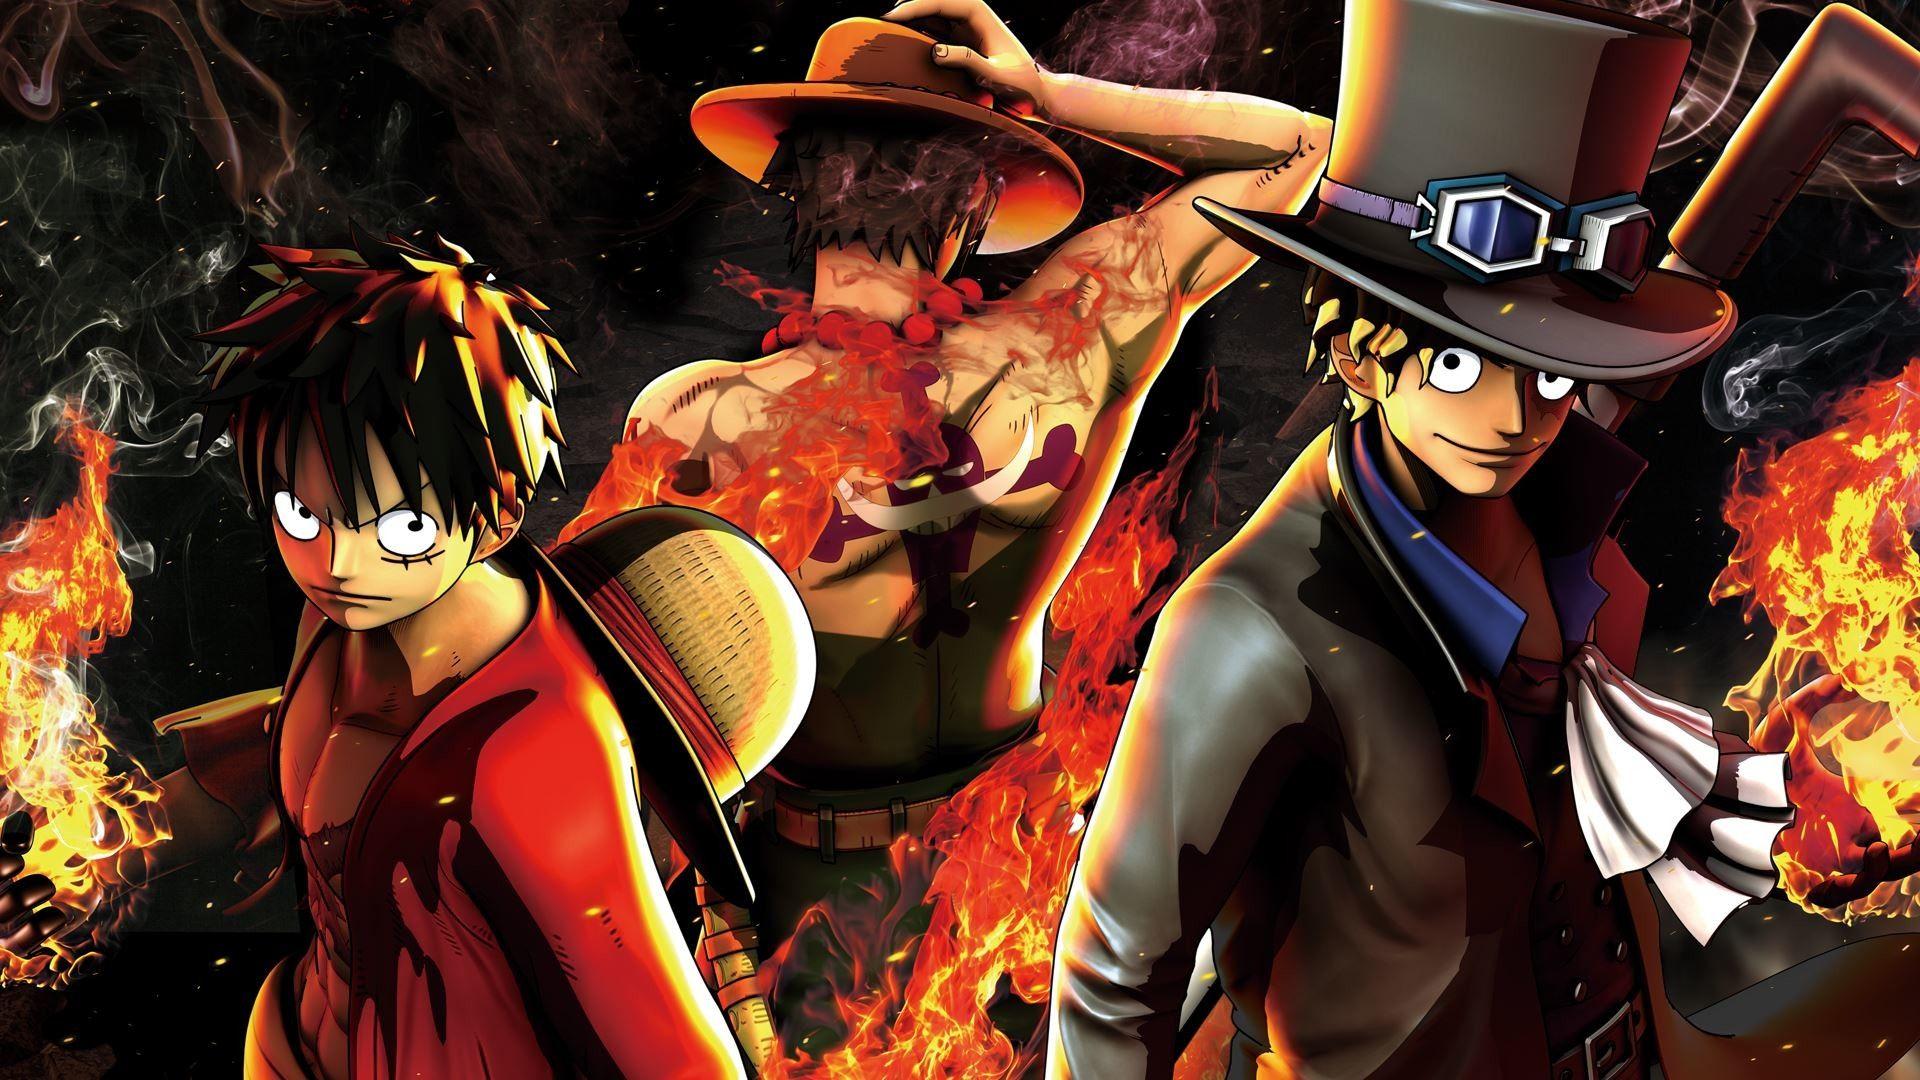 HD desktop wallpaper: Anime, Portgas D Ace, One Piece, Monkey D Luffy,  Straw Hat, Sabo (One Piece) download free picture #357460